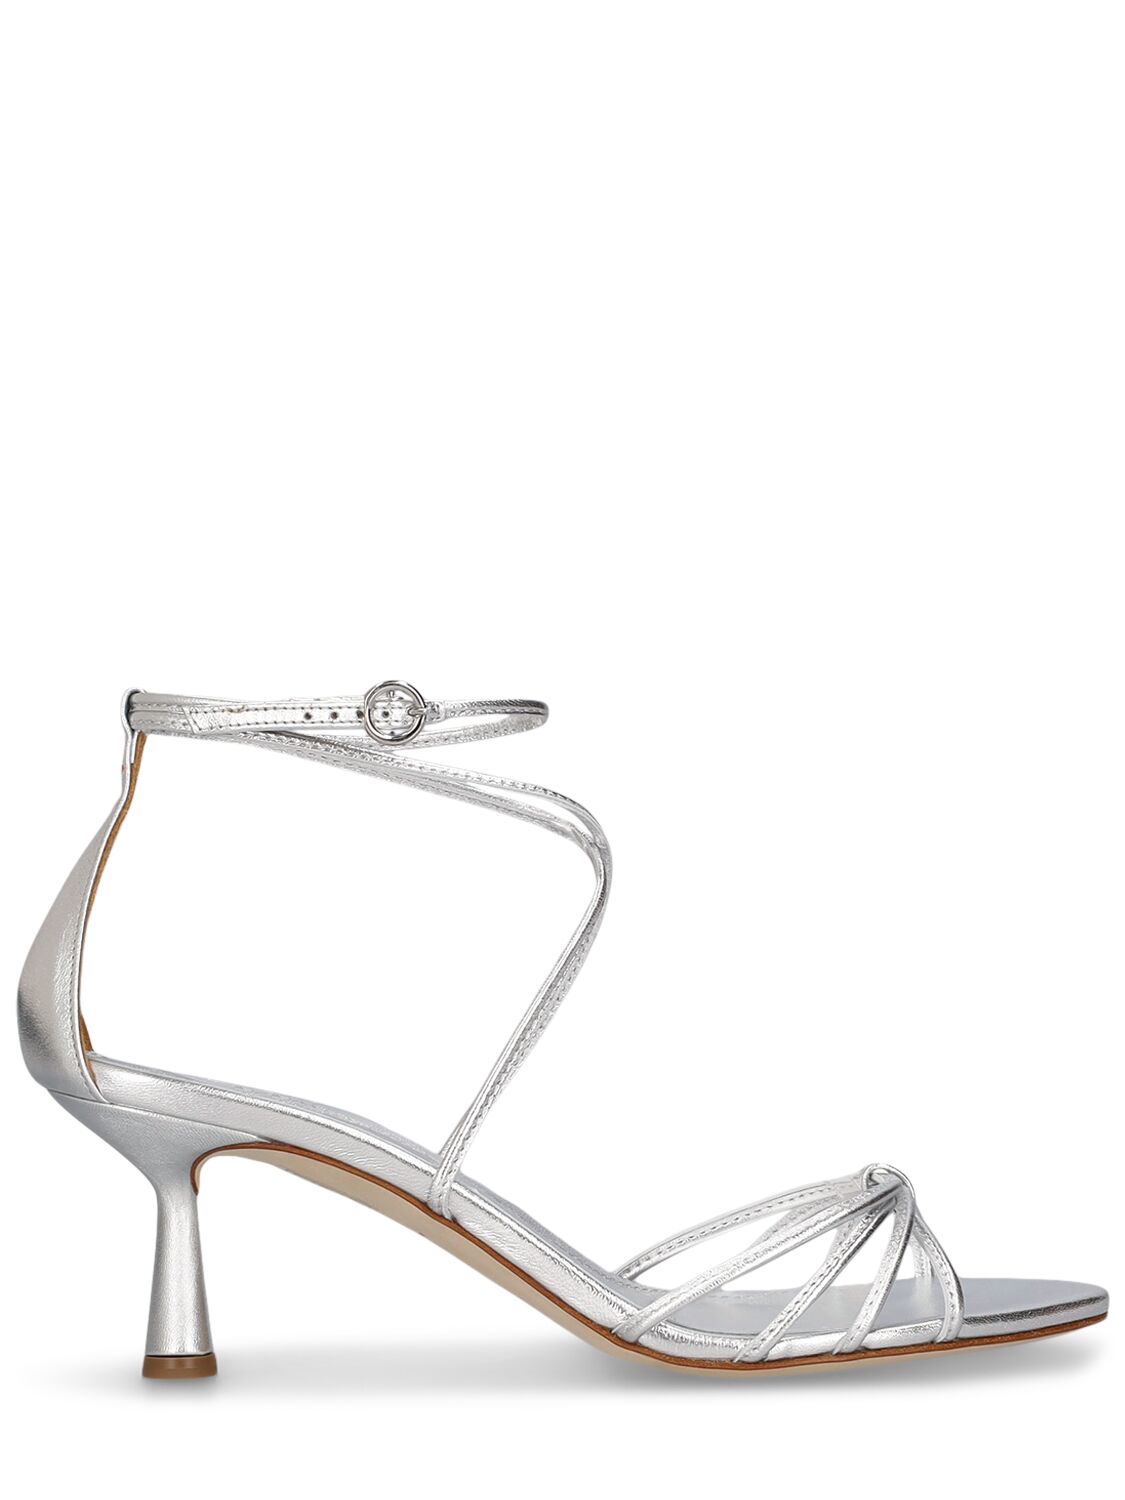 Shop Aeyde 65mm Luella Laminated Leather Sandals In Silver